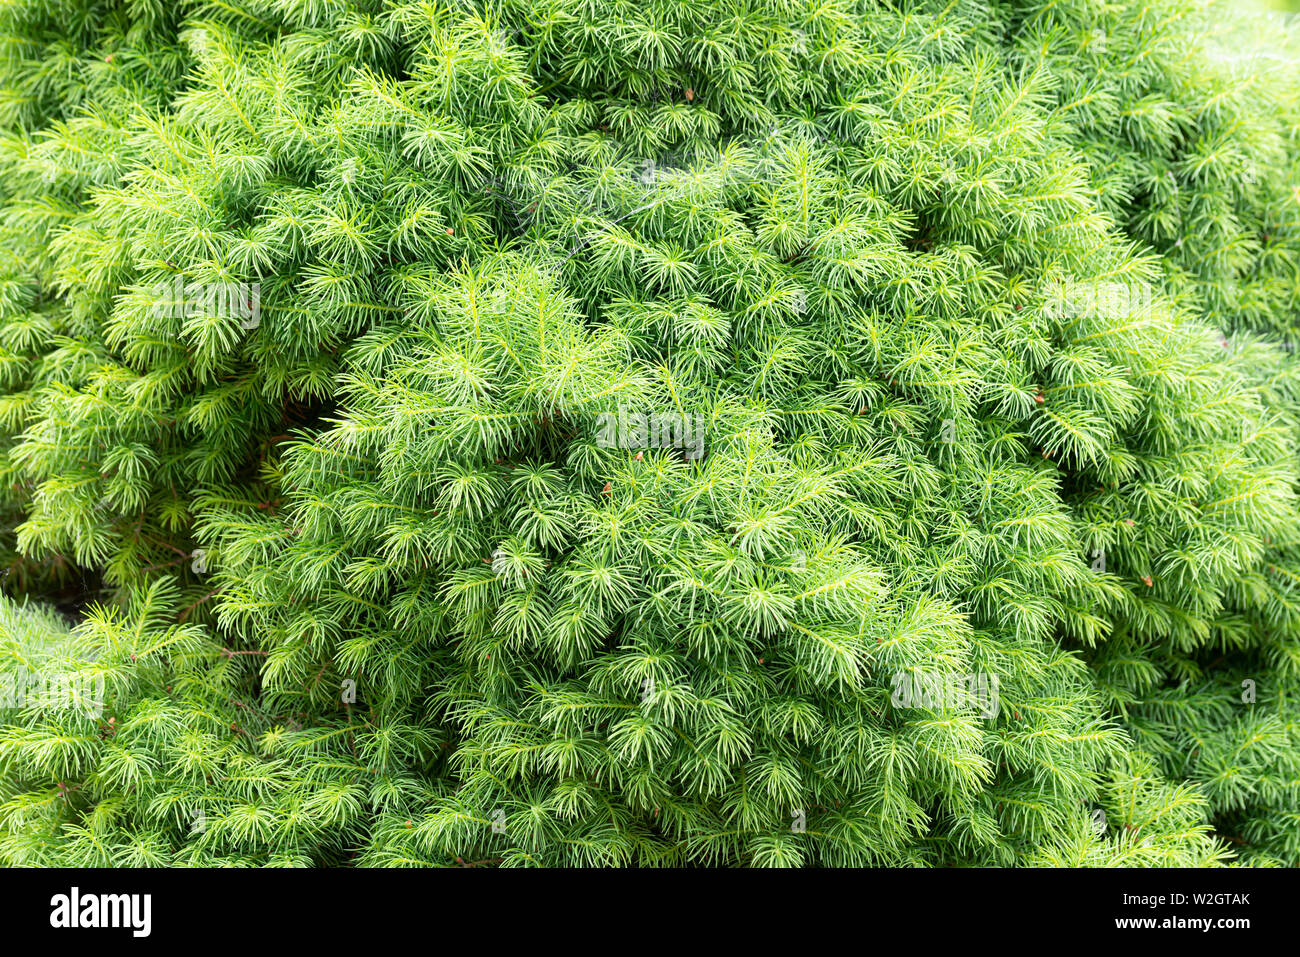 Close-up detail of a young Picea Abies Nidiformis with fresh sprouts in spring, appearing as a texture or background. Stock Photo